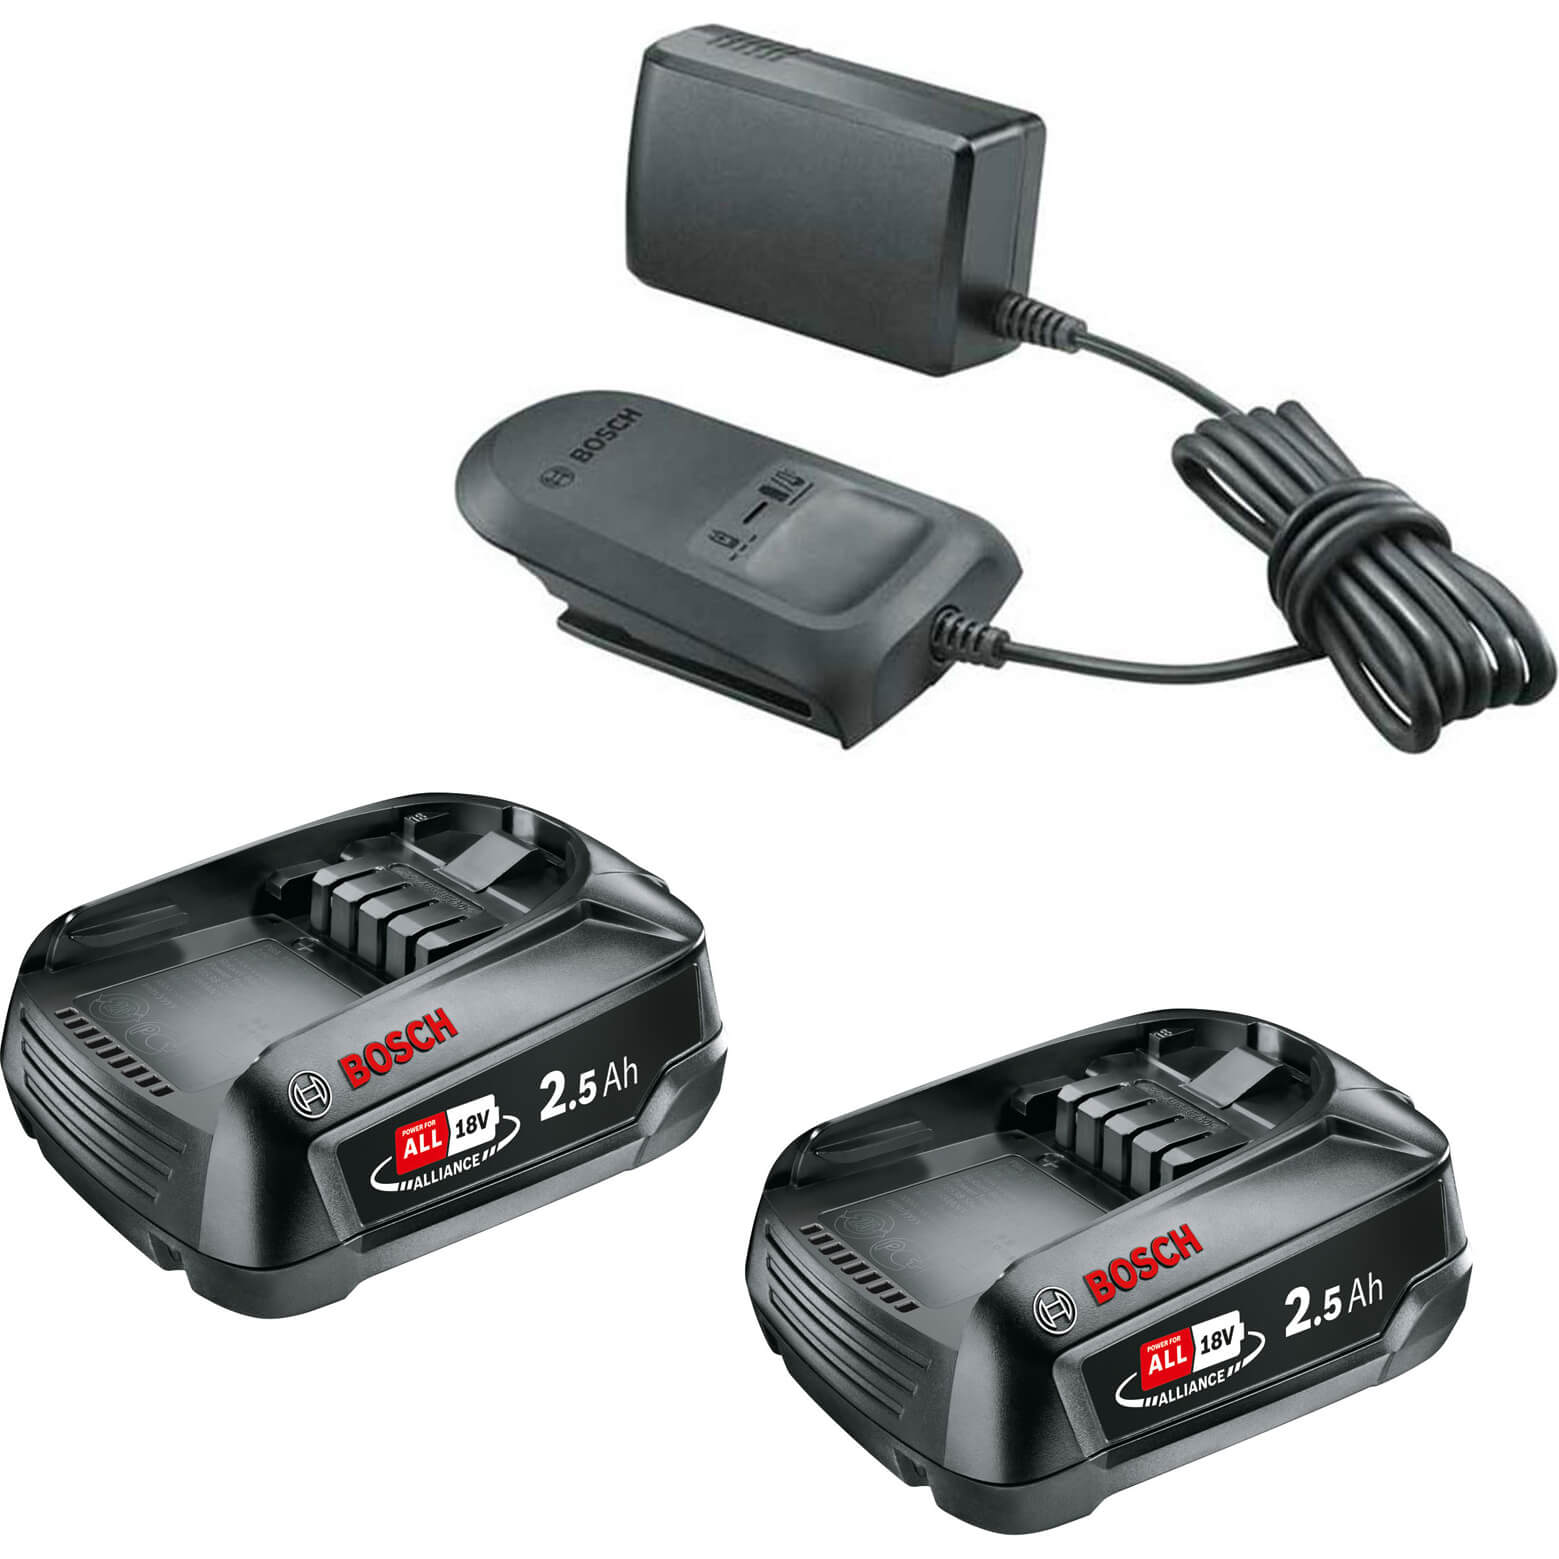 Bosch Genuine GREEN P4A 18v Cordless Li-ion Twin Battery Pack 2.5ah and Standard Charger 2.5ah